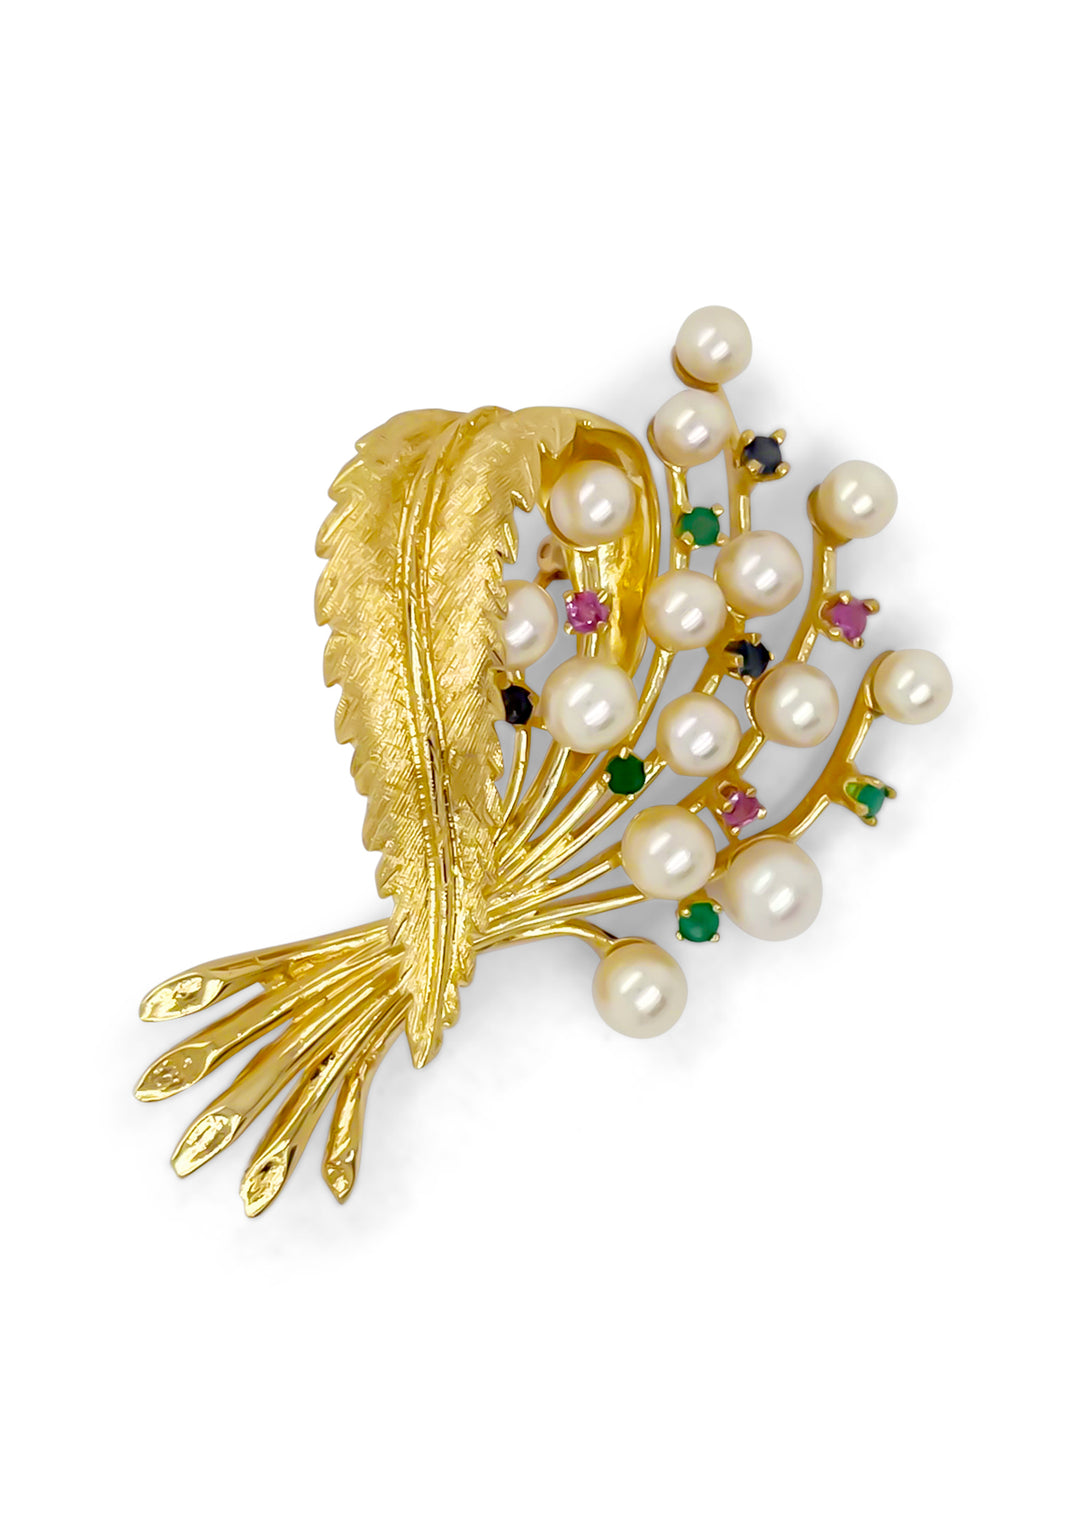 14K Yellow Gold Estate Pearl And Gemstone Brooch